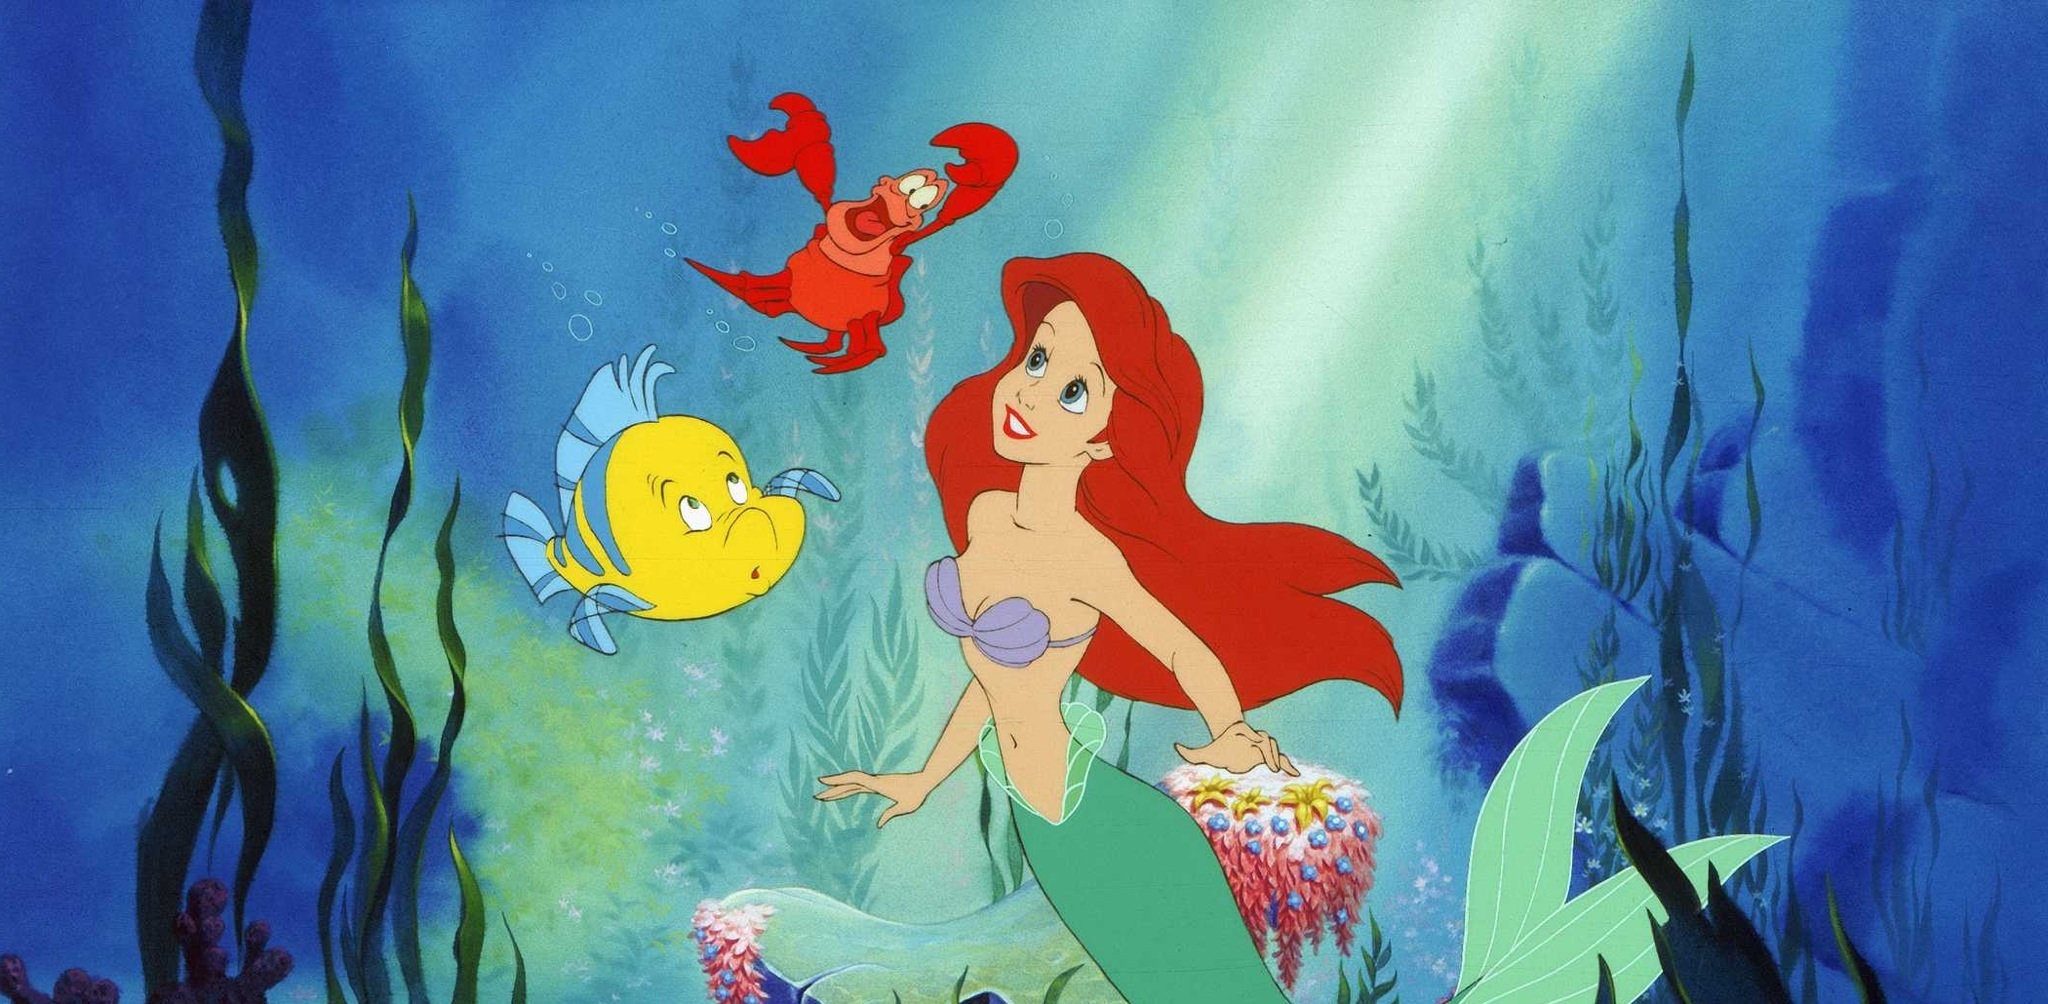 The Little Mermaid Blu-ray Steelbook is ready for order as a Zavvi Exclusive UK